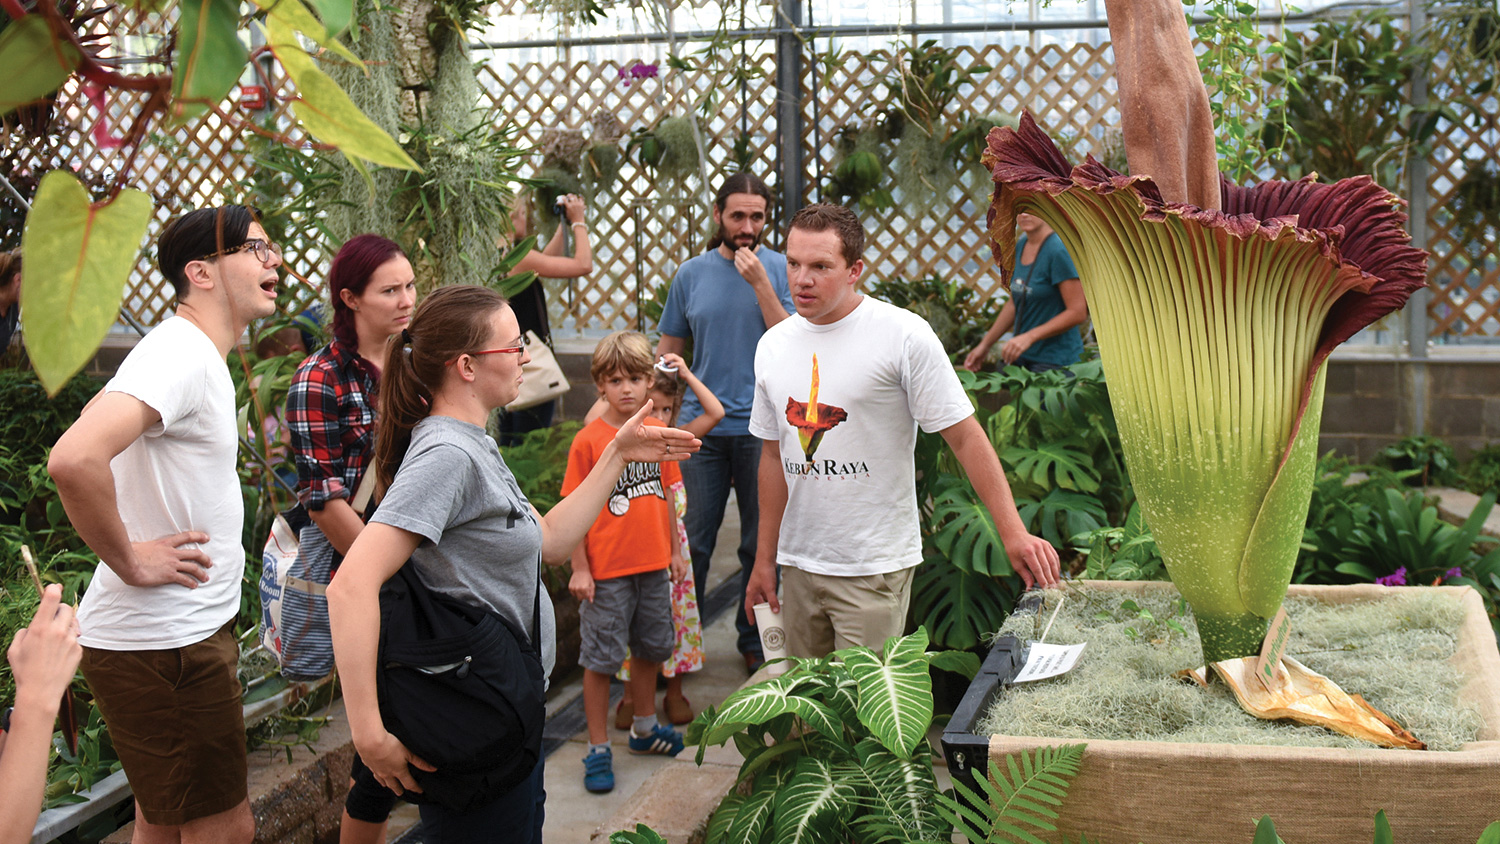 Brandon Huber, a horticulture student pursuing his master’s degree at NC State, and his rare titan arum – also known as the corpse flower – at a campus greenhouse in September 2016.